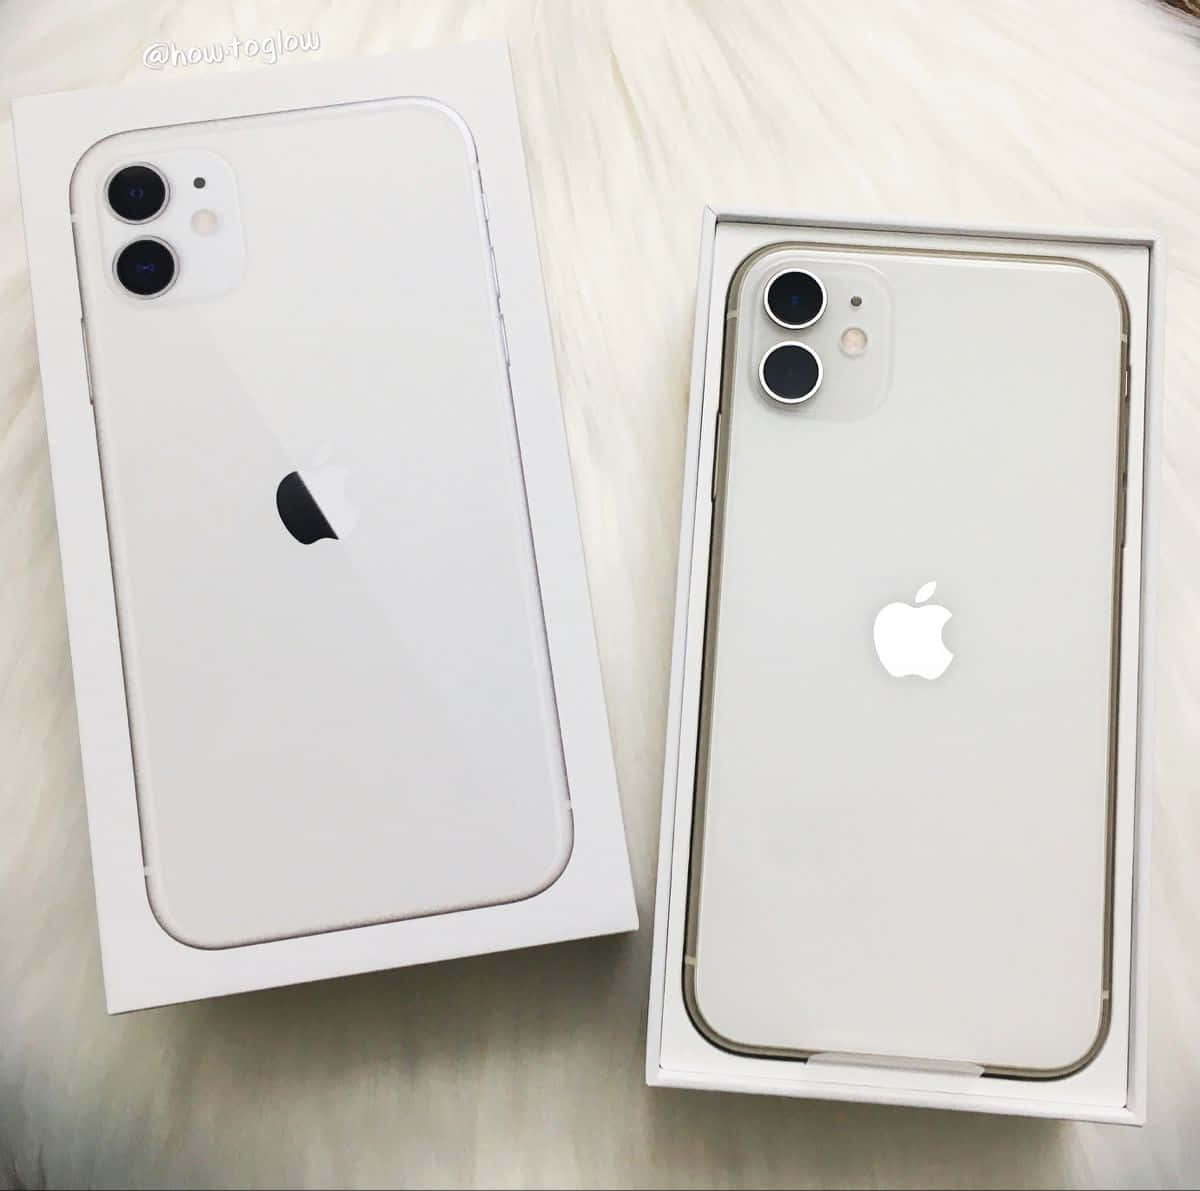 New iPhone 12 with 5G Connectivity